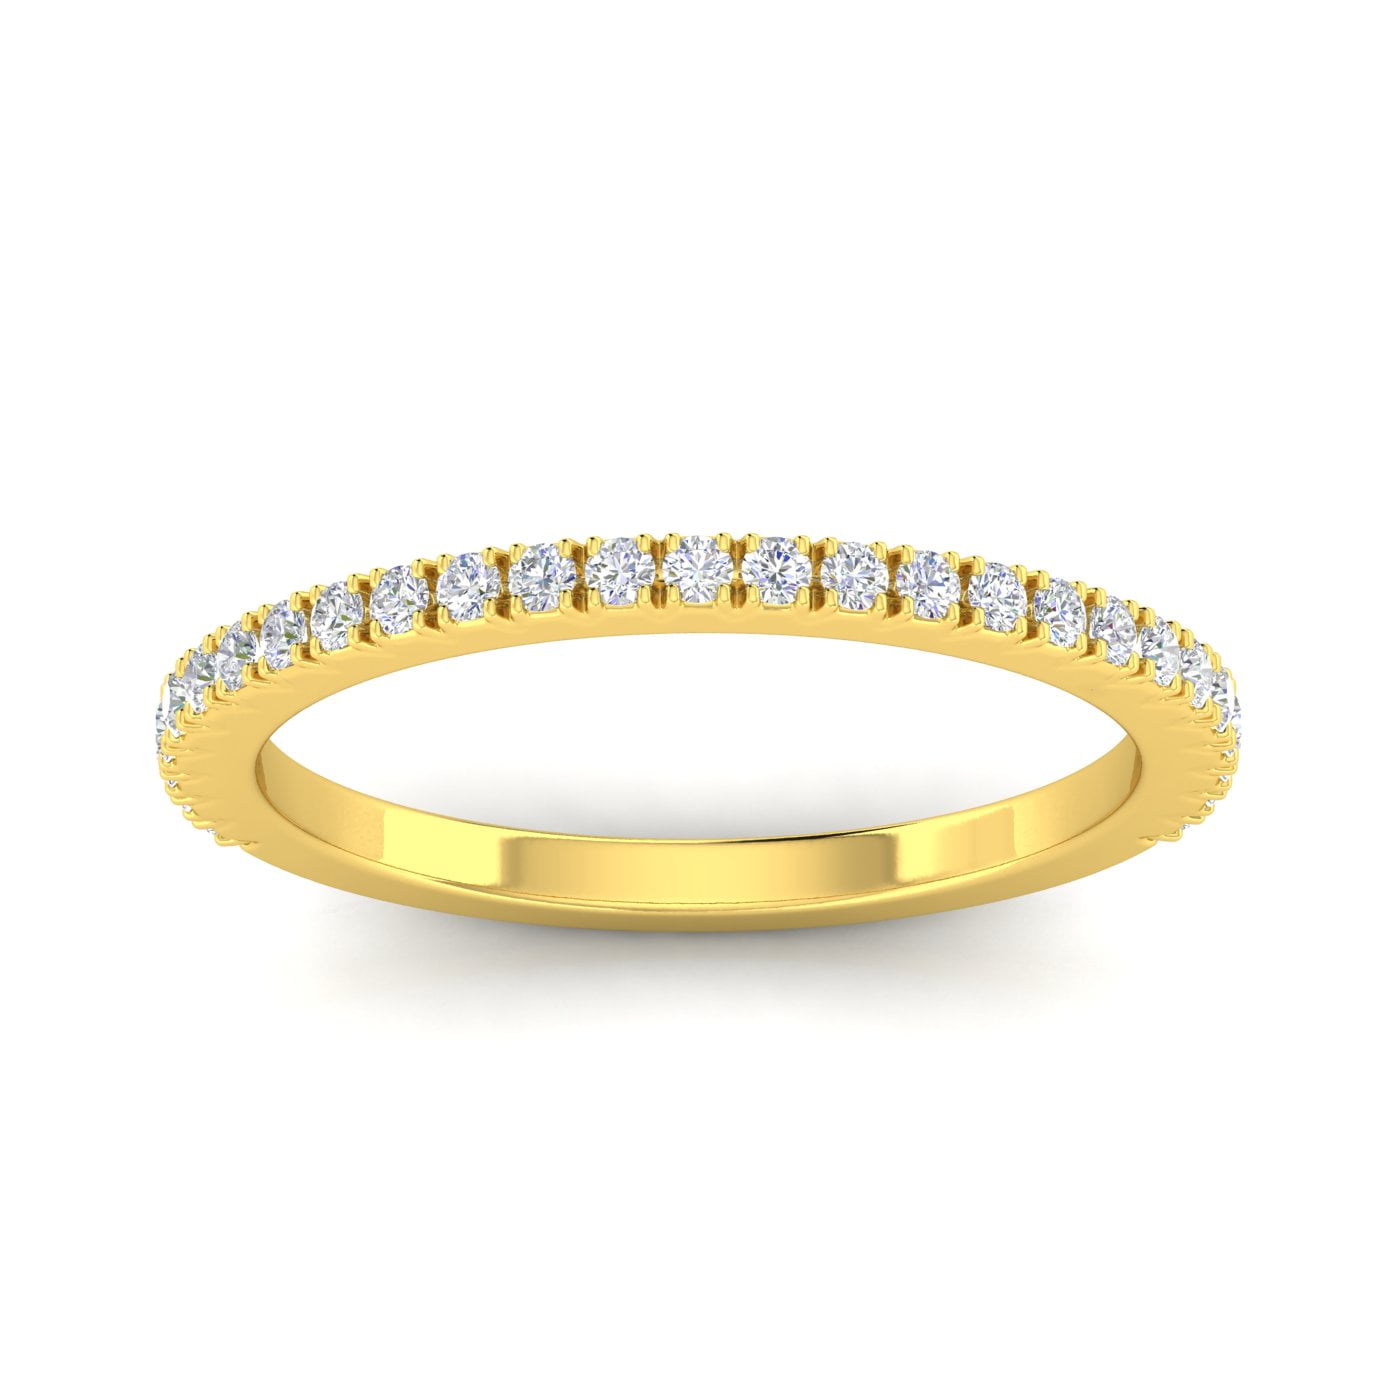 Details about   1.00Ct Diamond Engagement Wedding Band Men's Pinky Ring 14k Yellow Gold Finish 